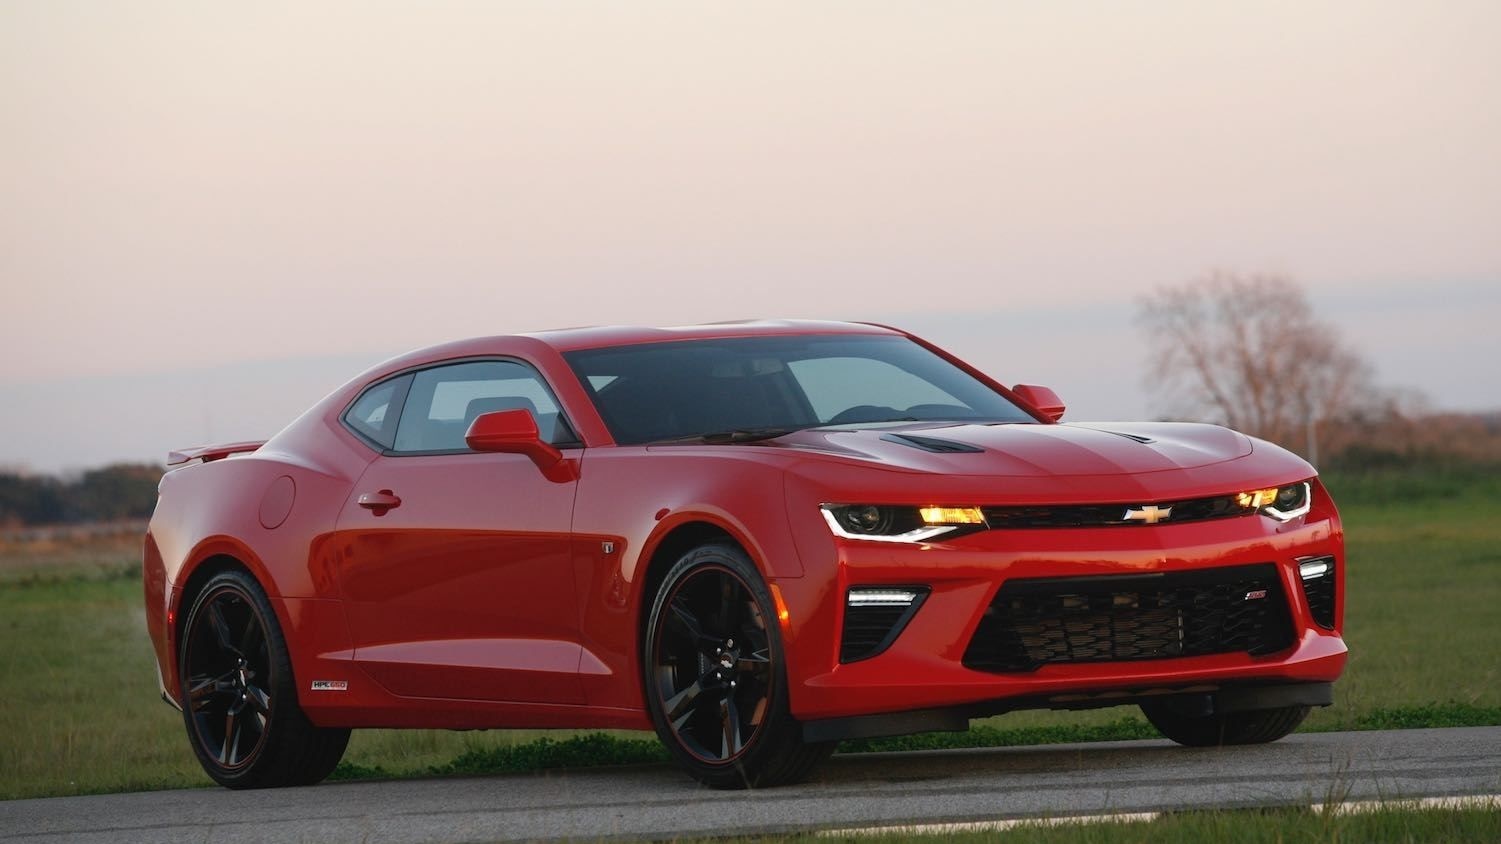 2016 Camaro SS Hennessey HPE1000 Supercharged Upgrade